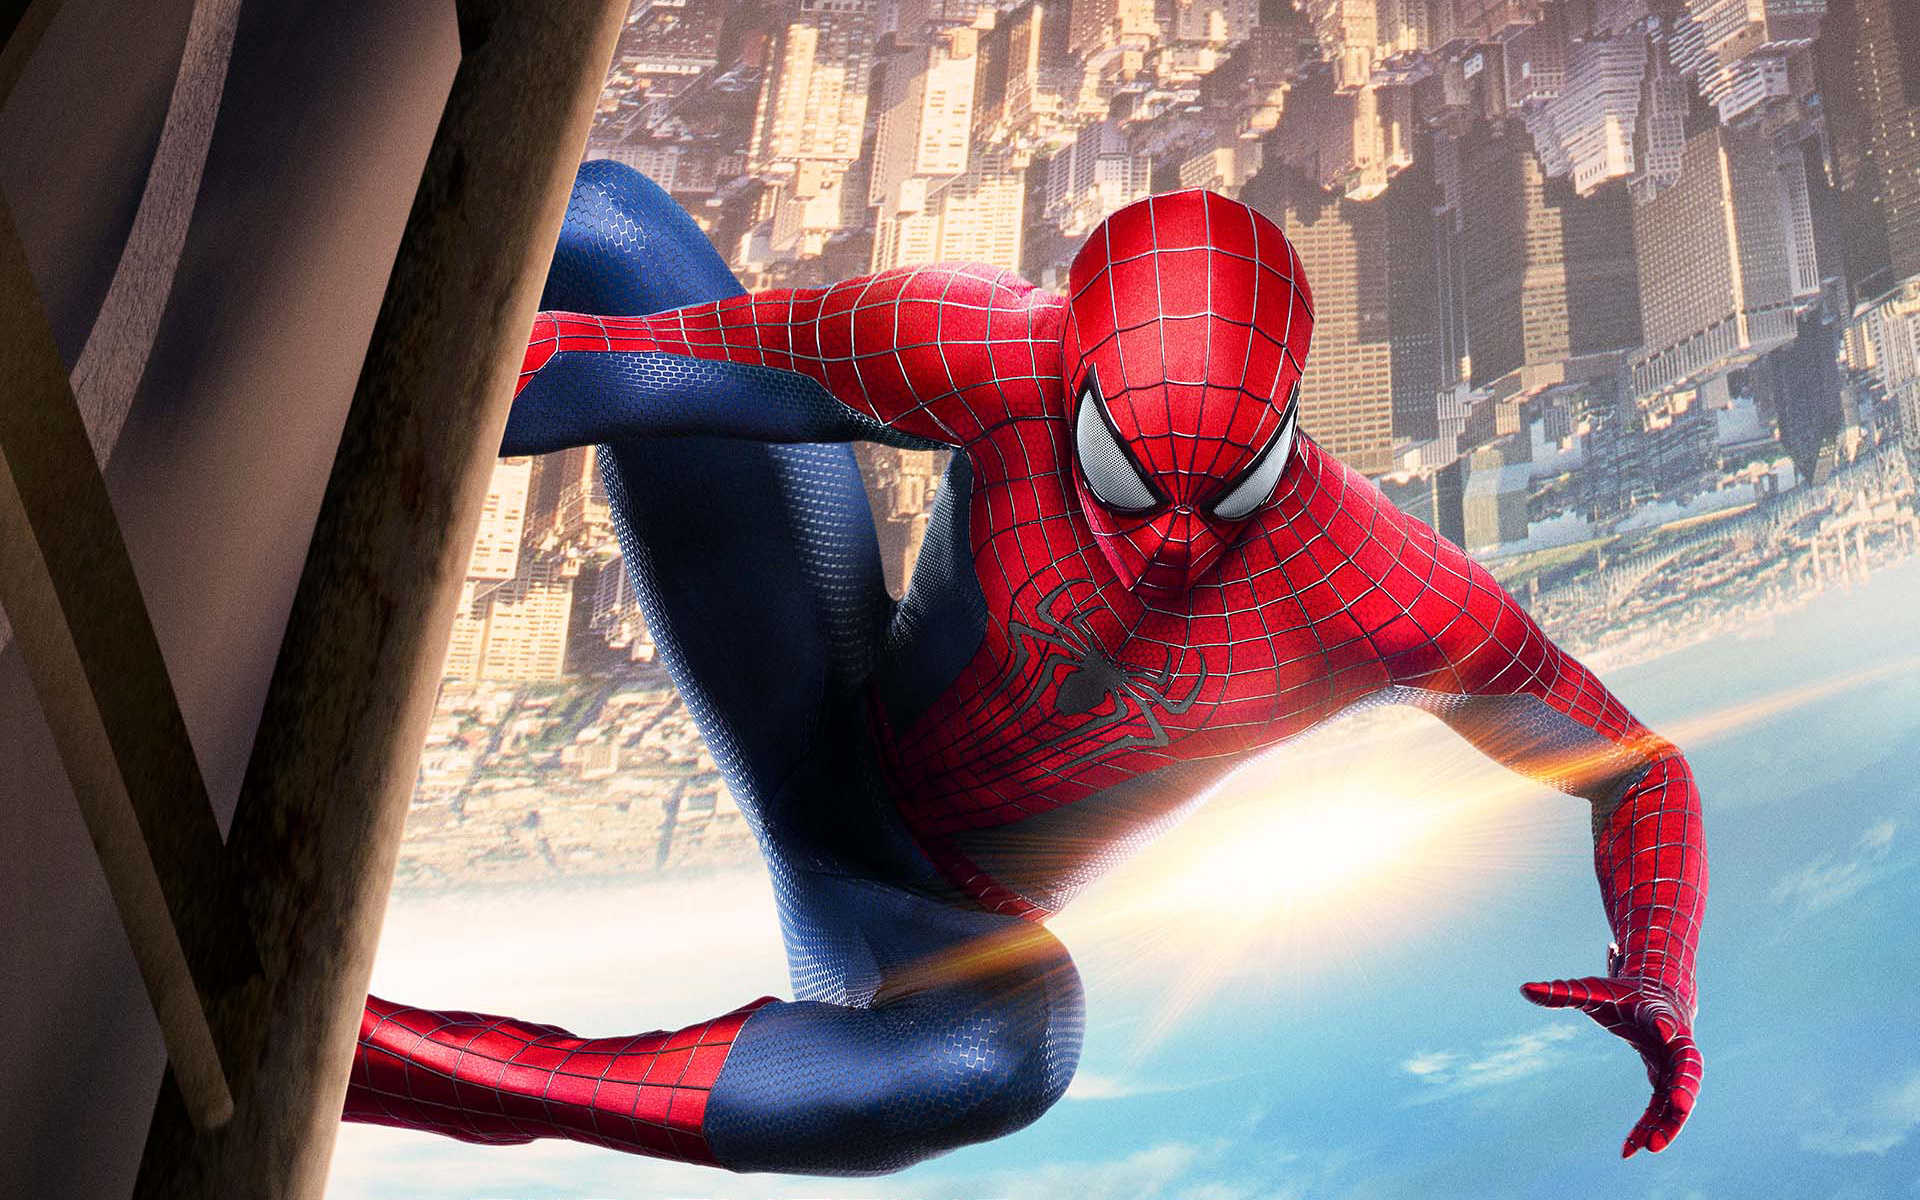 Amazing spider man 2 hd wallpapers AMAZING